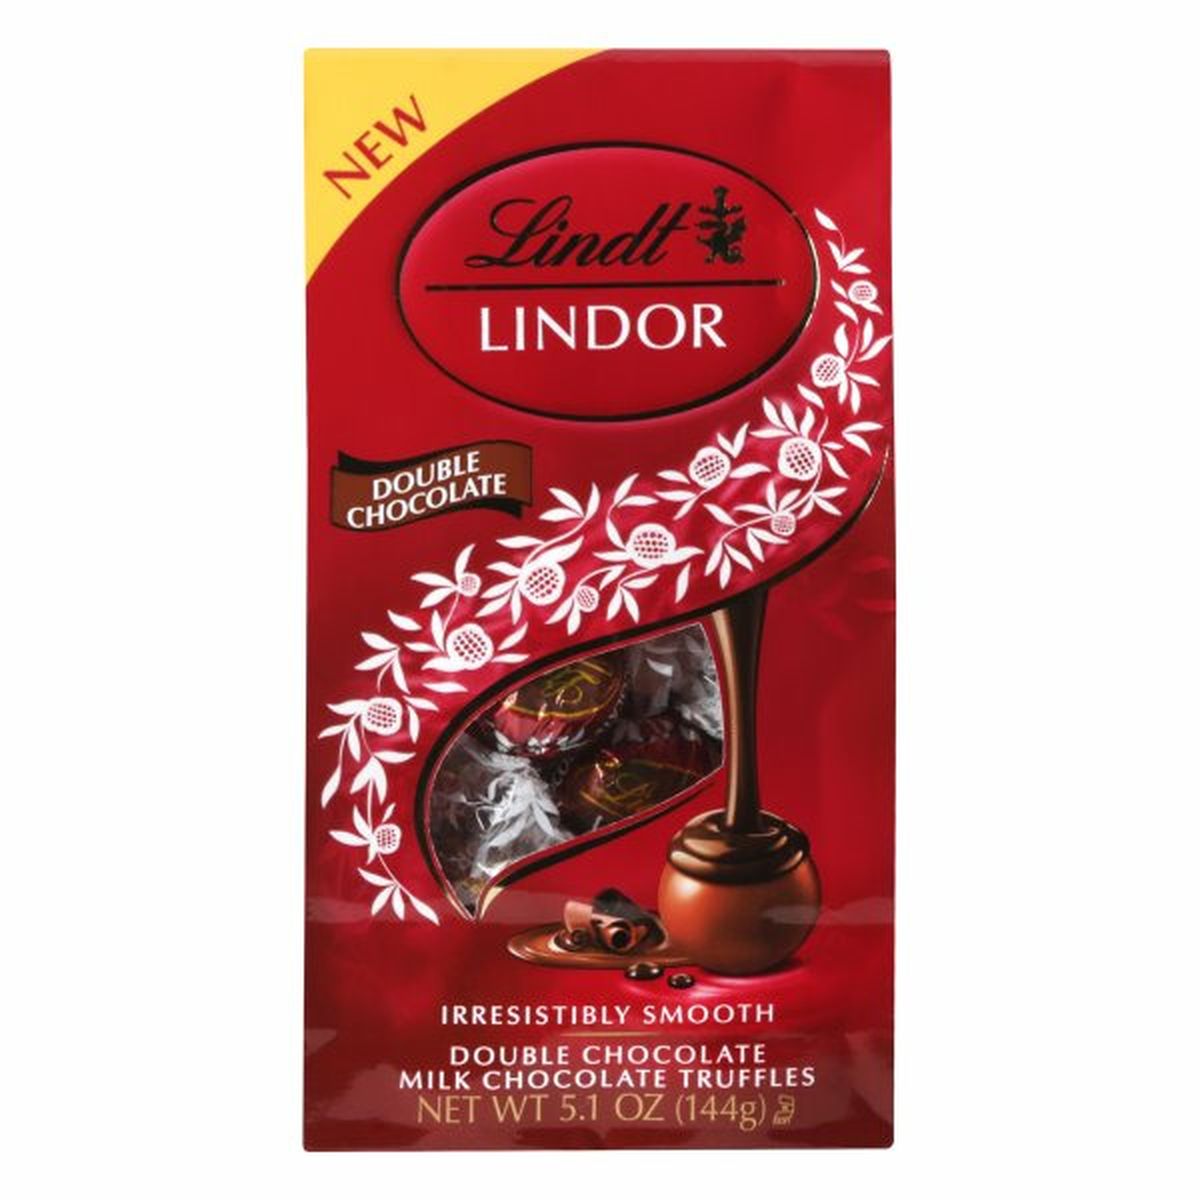 Calories in Lindt Truffles, Double Chocolate Milk Chocolate